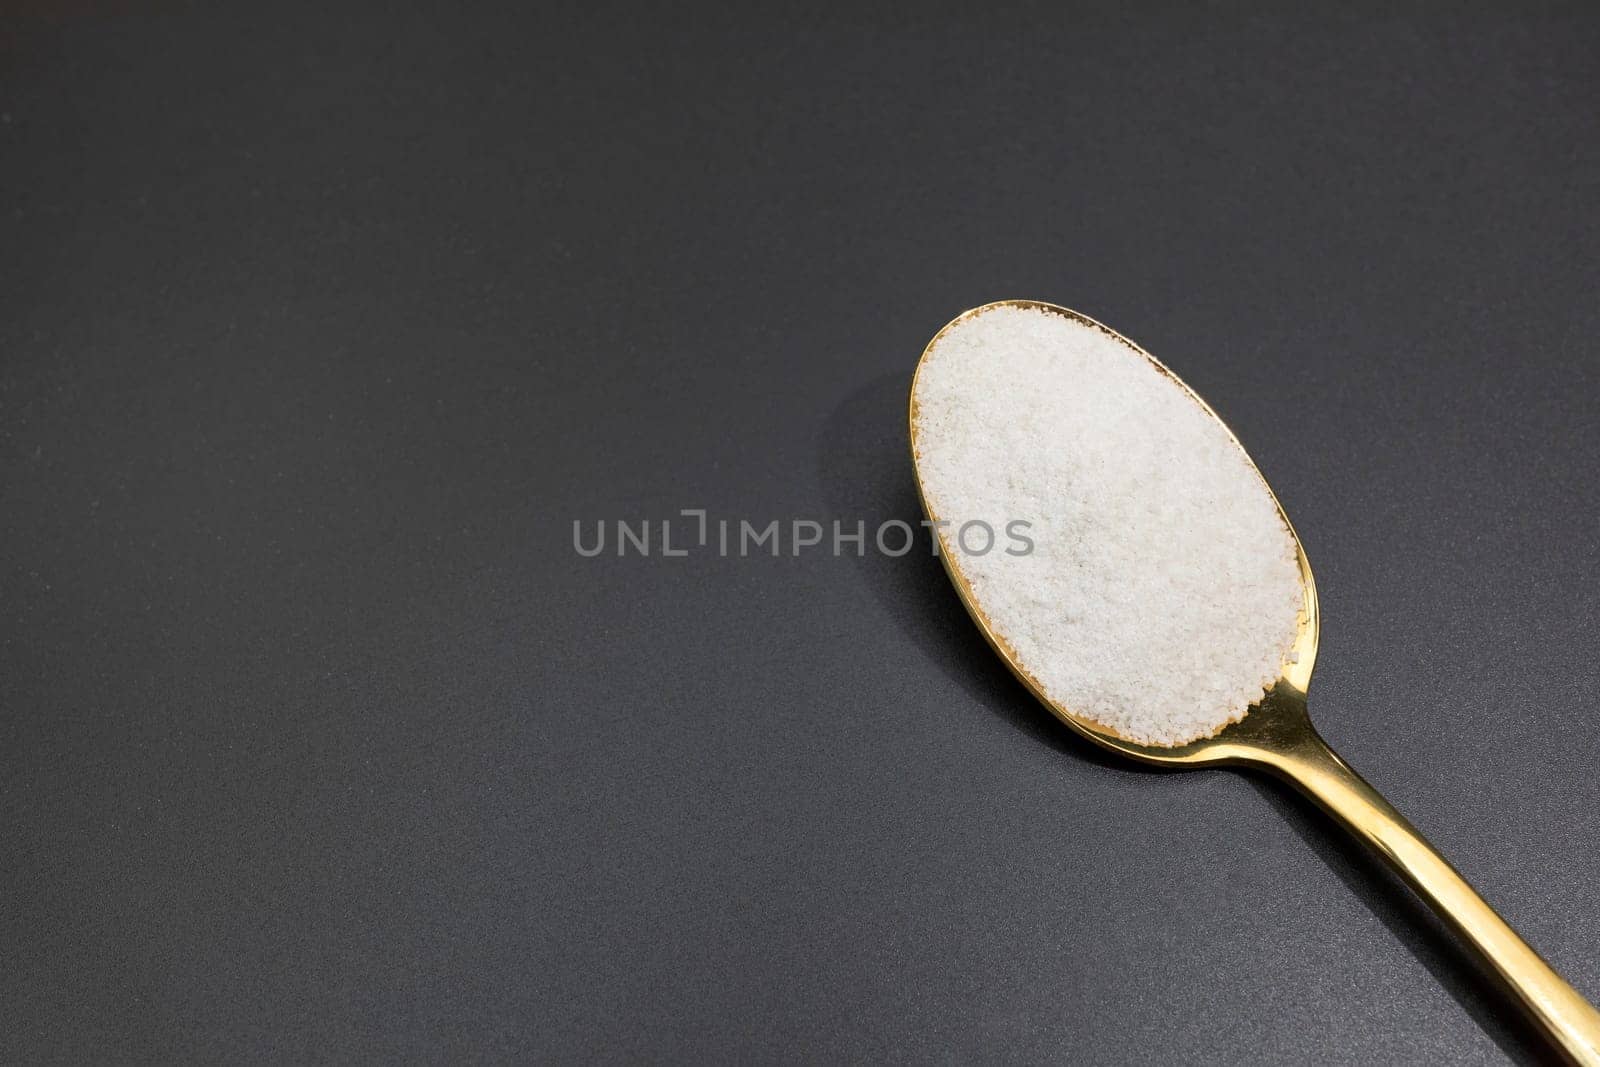 Design Celtic Gray Sea Salt In Golden Spoon on Dark Table, Copy Space. Horizontal Plane. Natural And Unrefined Salt Harvested From Brittany, France. Natural Minerals And Trace Elements, Superfood by netatsi